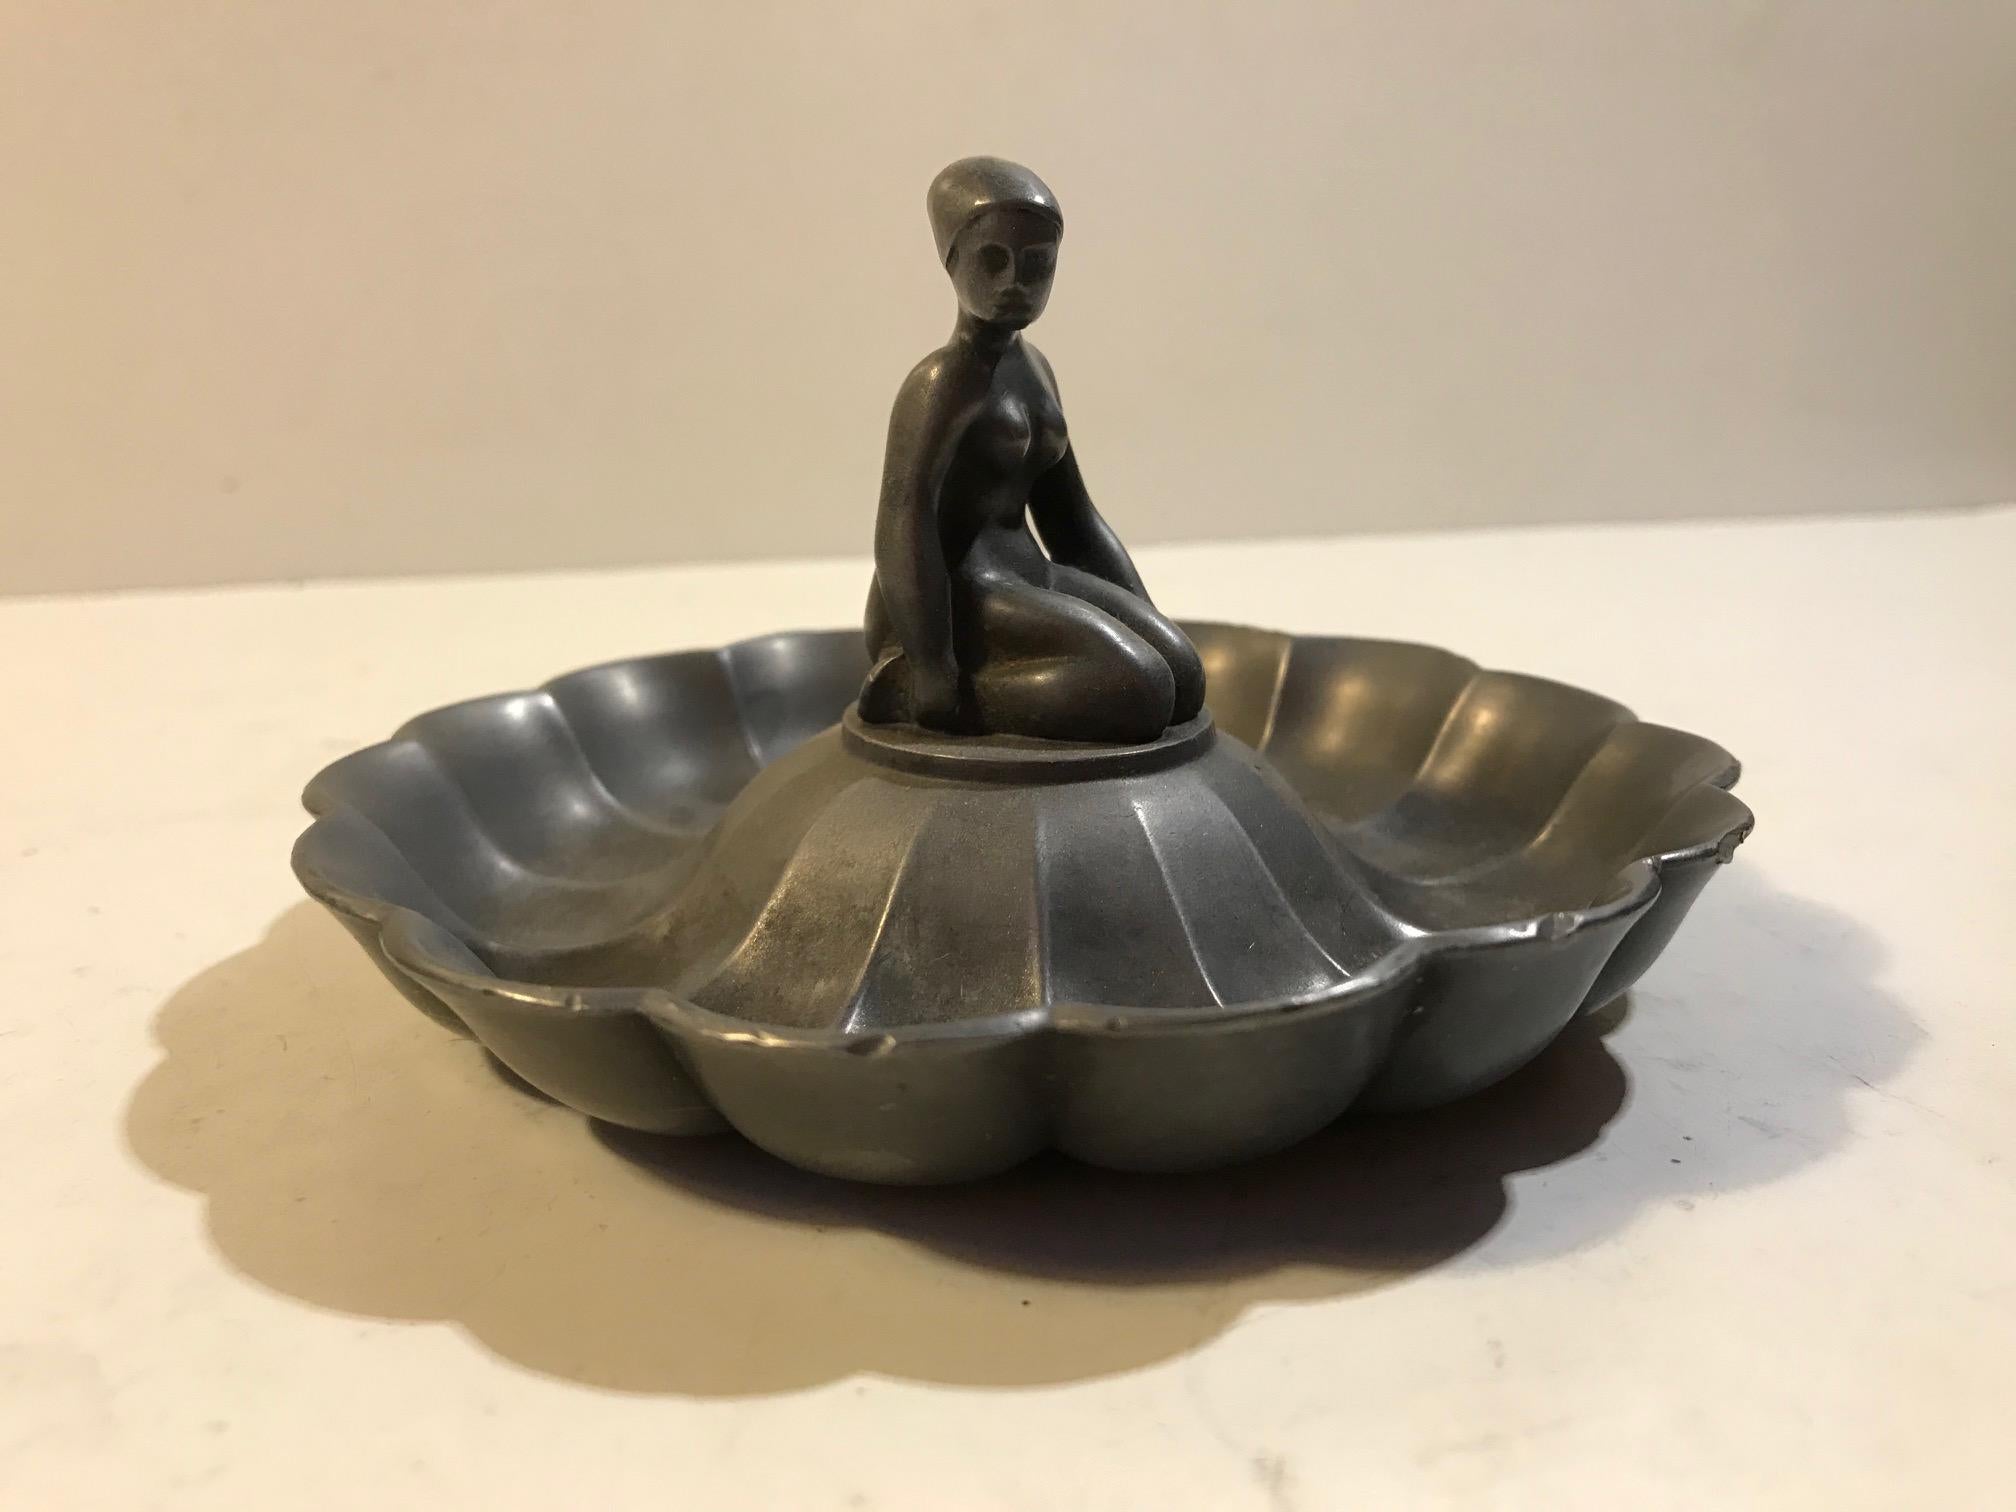 Small figural dish or ashtray by Just Andersen. Made from patinated pewter. Imprinted Just beneath its base.